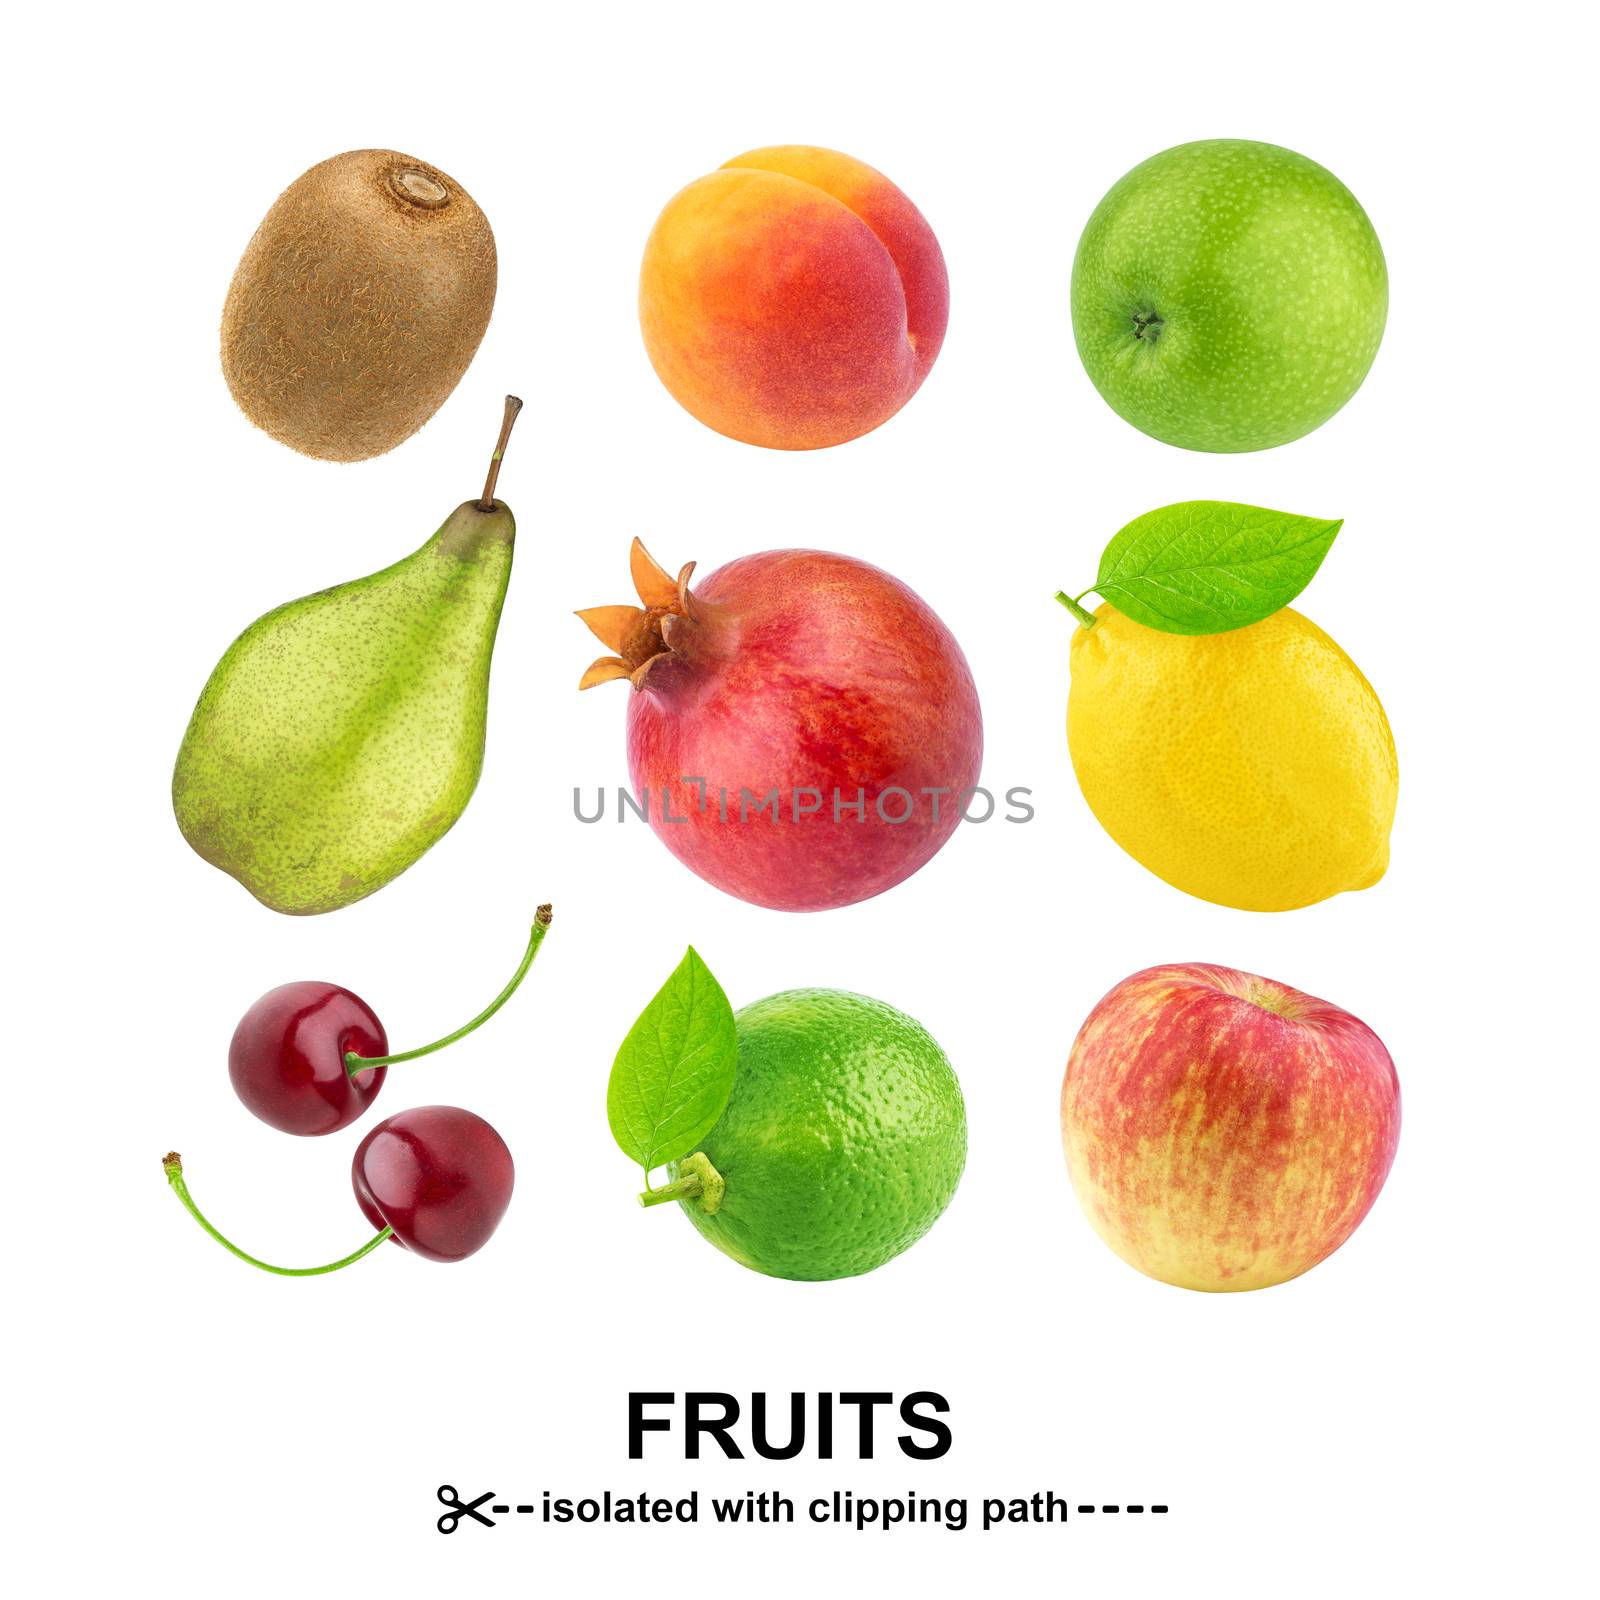 Fruits collection. Different fruit isolated on white background with clipping path.